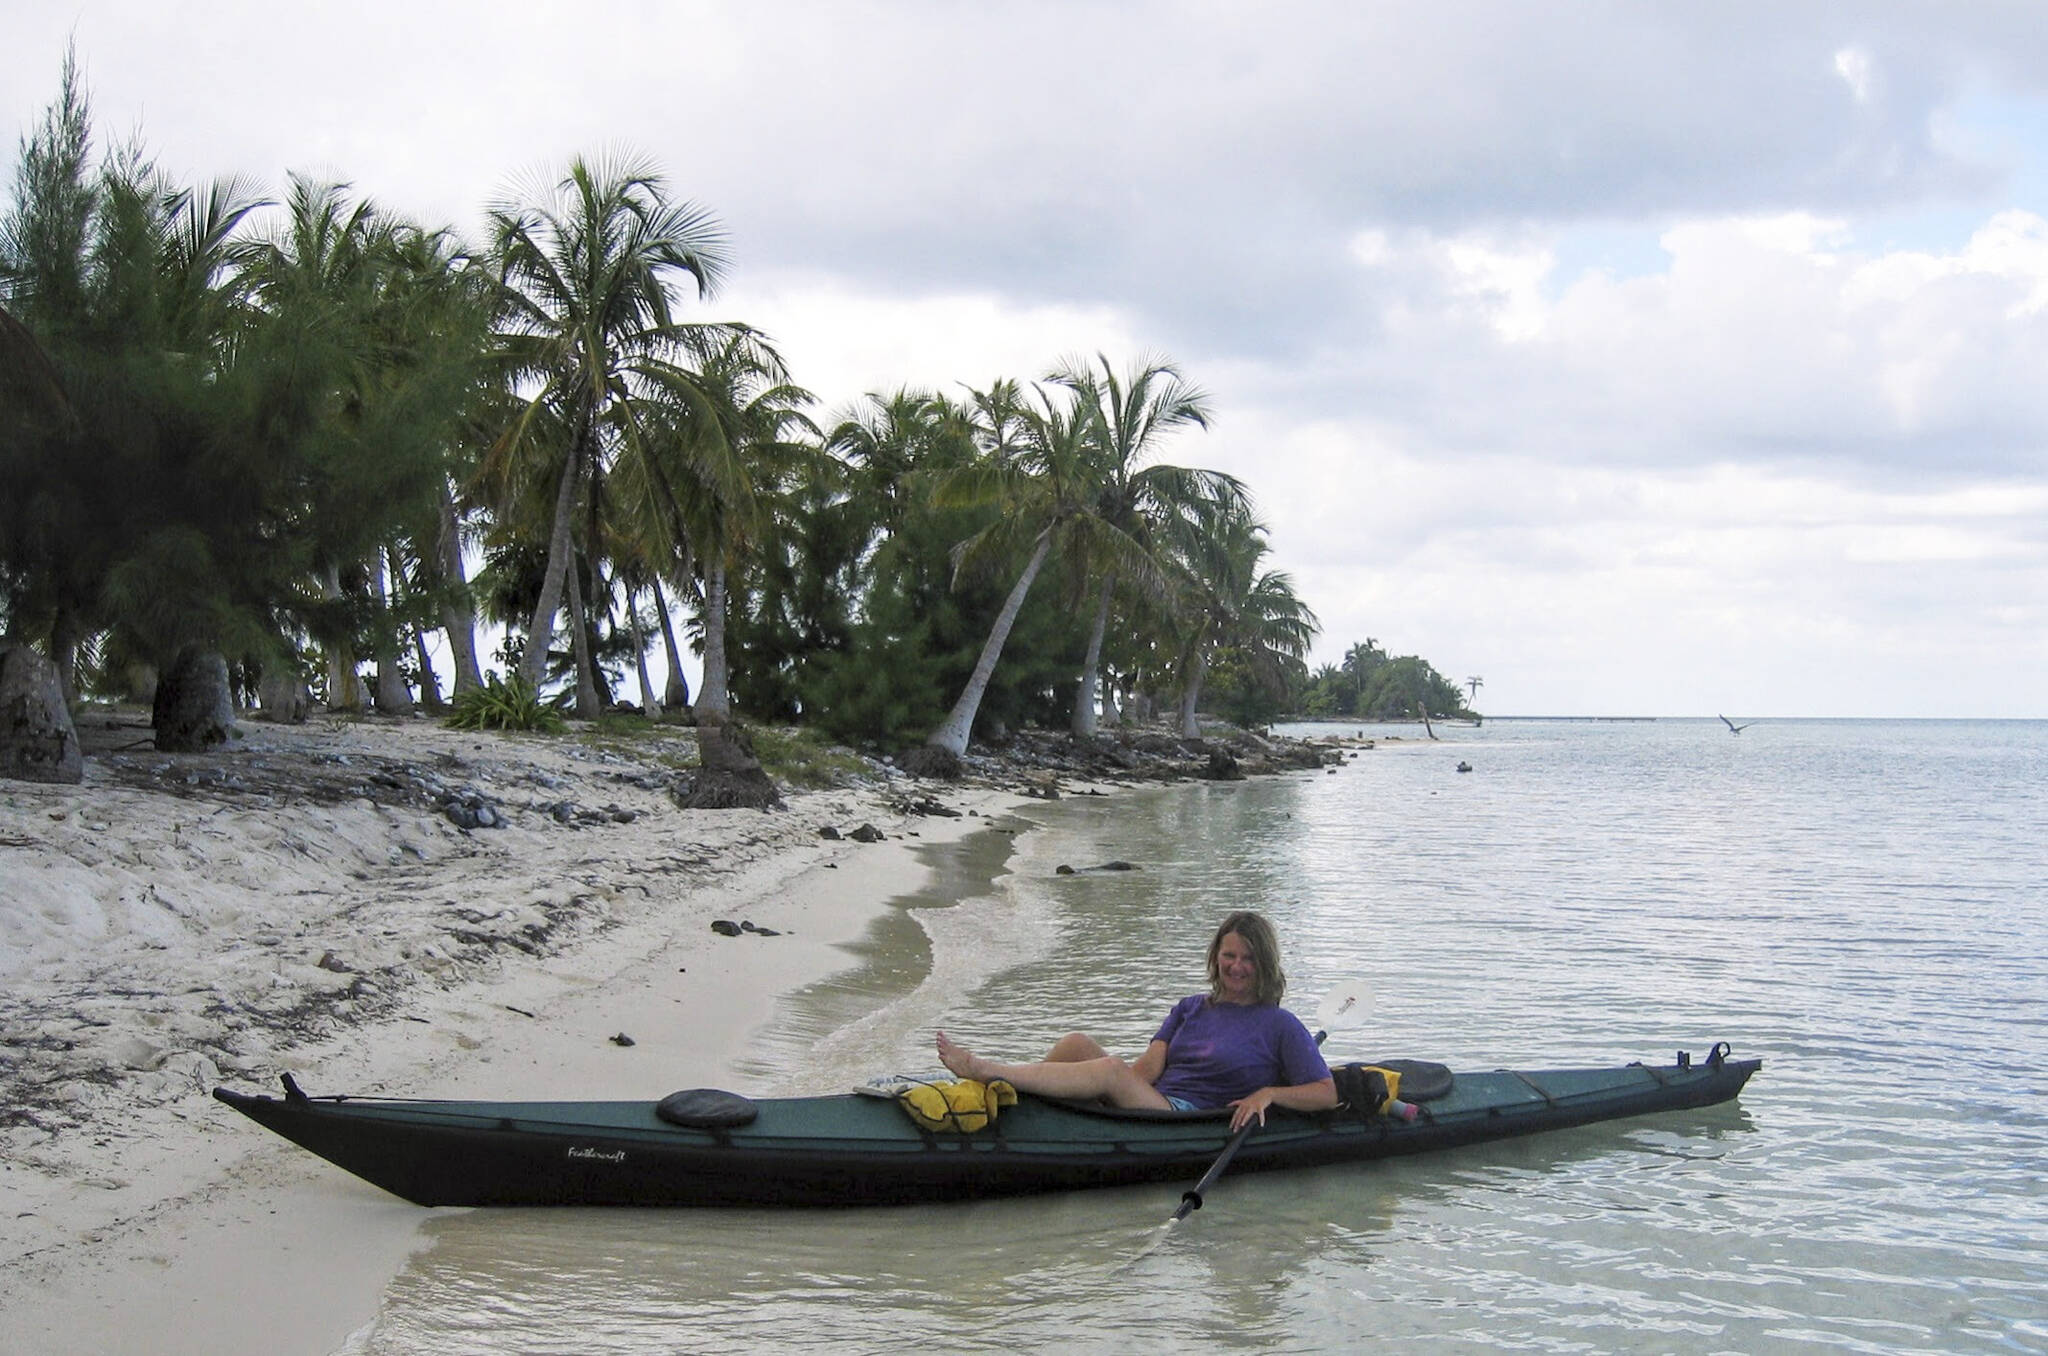 Susan Aramovich relaxes in her kayak on a tropical beach in this photo from Scott Burbank’s “Interior Waypoints.” (Photo provided)